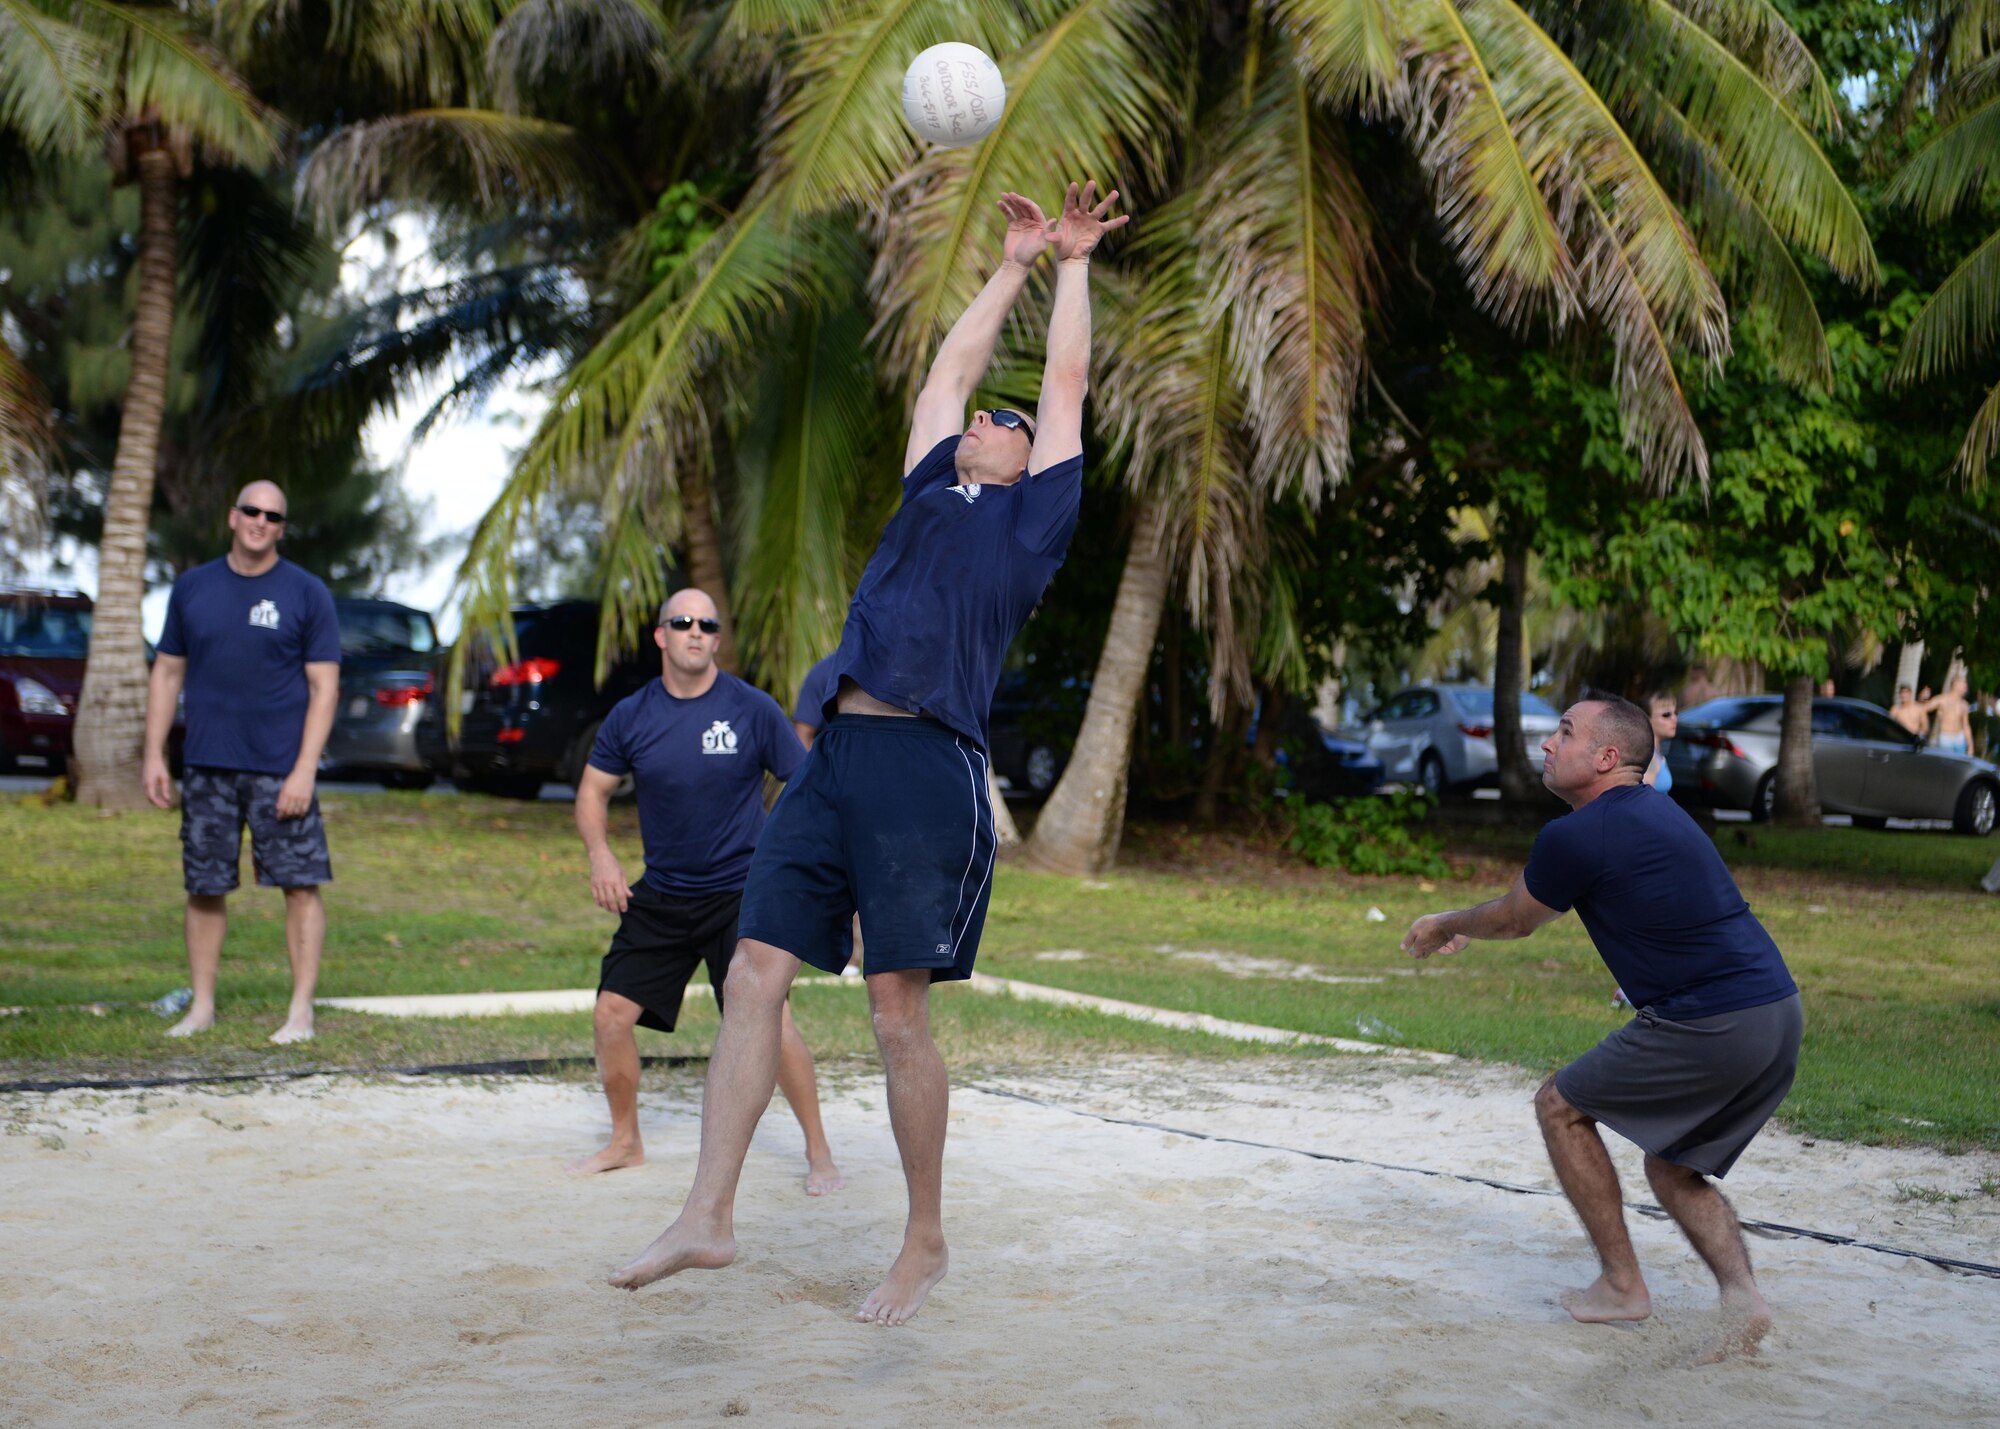 Team Andersen chief master sgts. receive a serve during the Chief vs. Eagles volleyball game Oct. 3, 2014, on Andersen Air Force Base, Guam. The game was a part of an ongoing competitive series  between the two base leadership groups. (U.S. Air Force photo by Senior Airman Katrina M. Brisbin/Released)